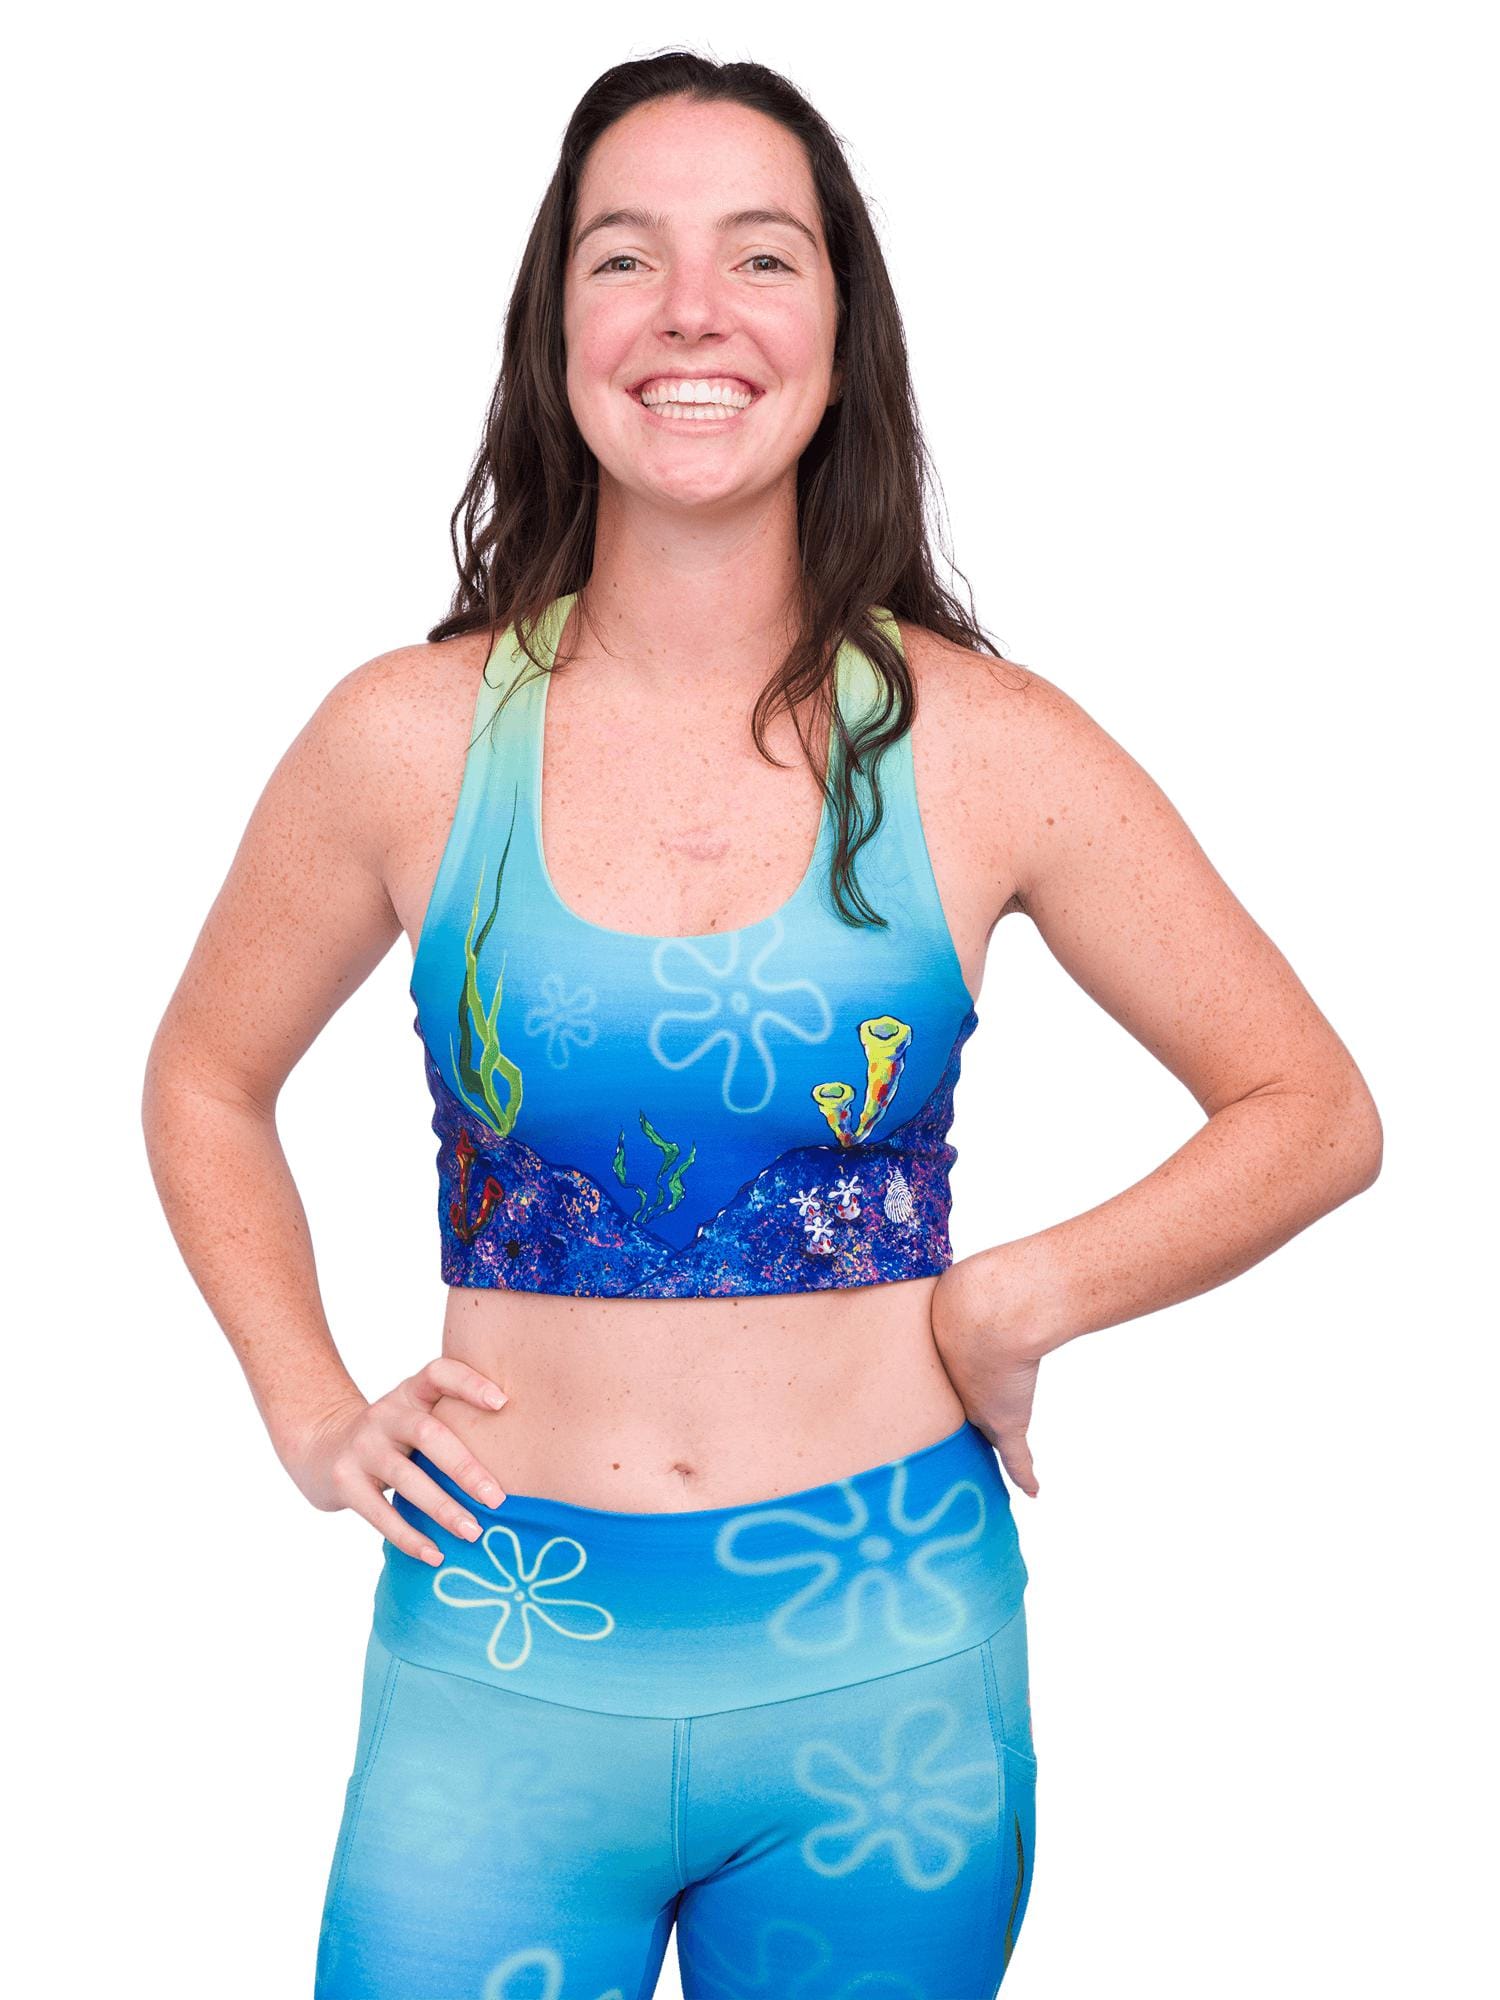 Model: Maddie is the Program & Outreach Director at Debris Free Oceans and a restoration ecology educator. She is 5’8”, 135lbs, and wearing a size M legging and top.